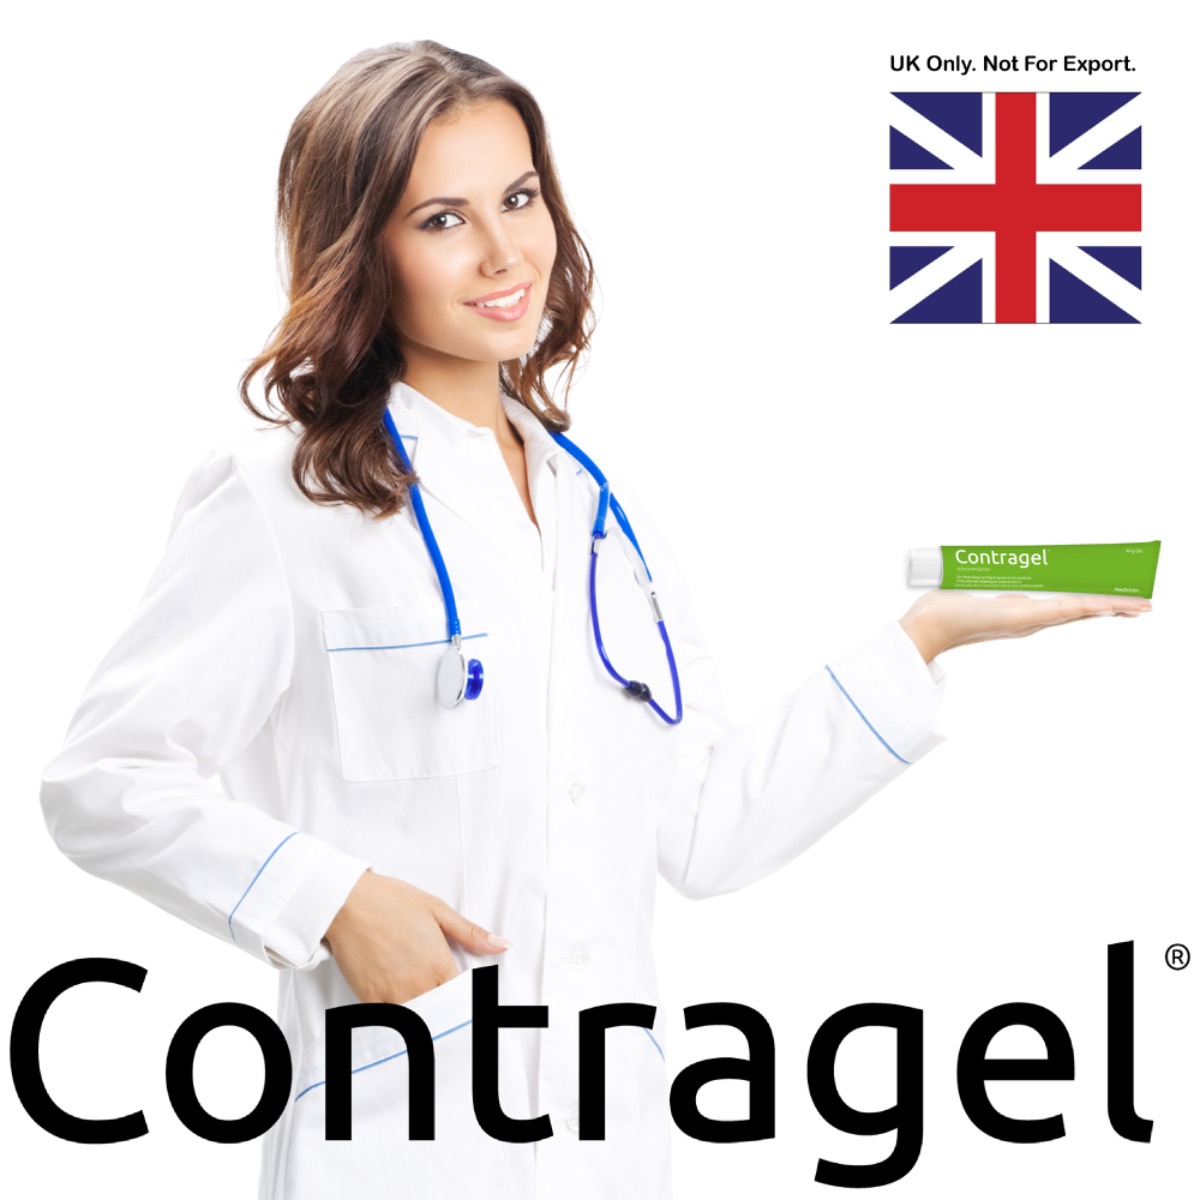 Buy Contragel Cheap, The Natural Alternative To Spermicide, In The UK.